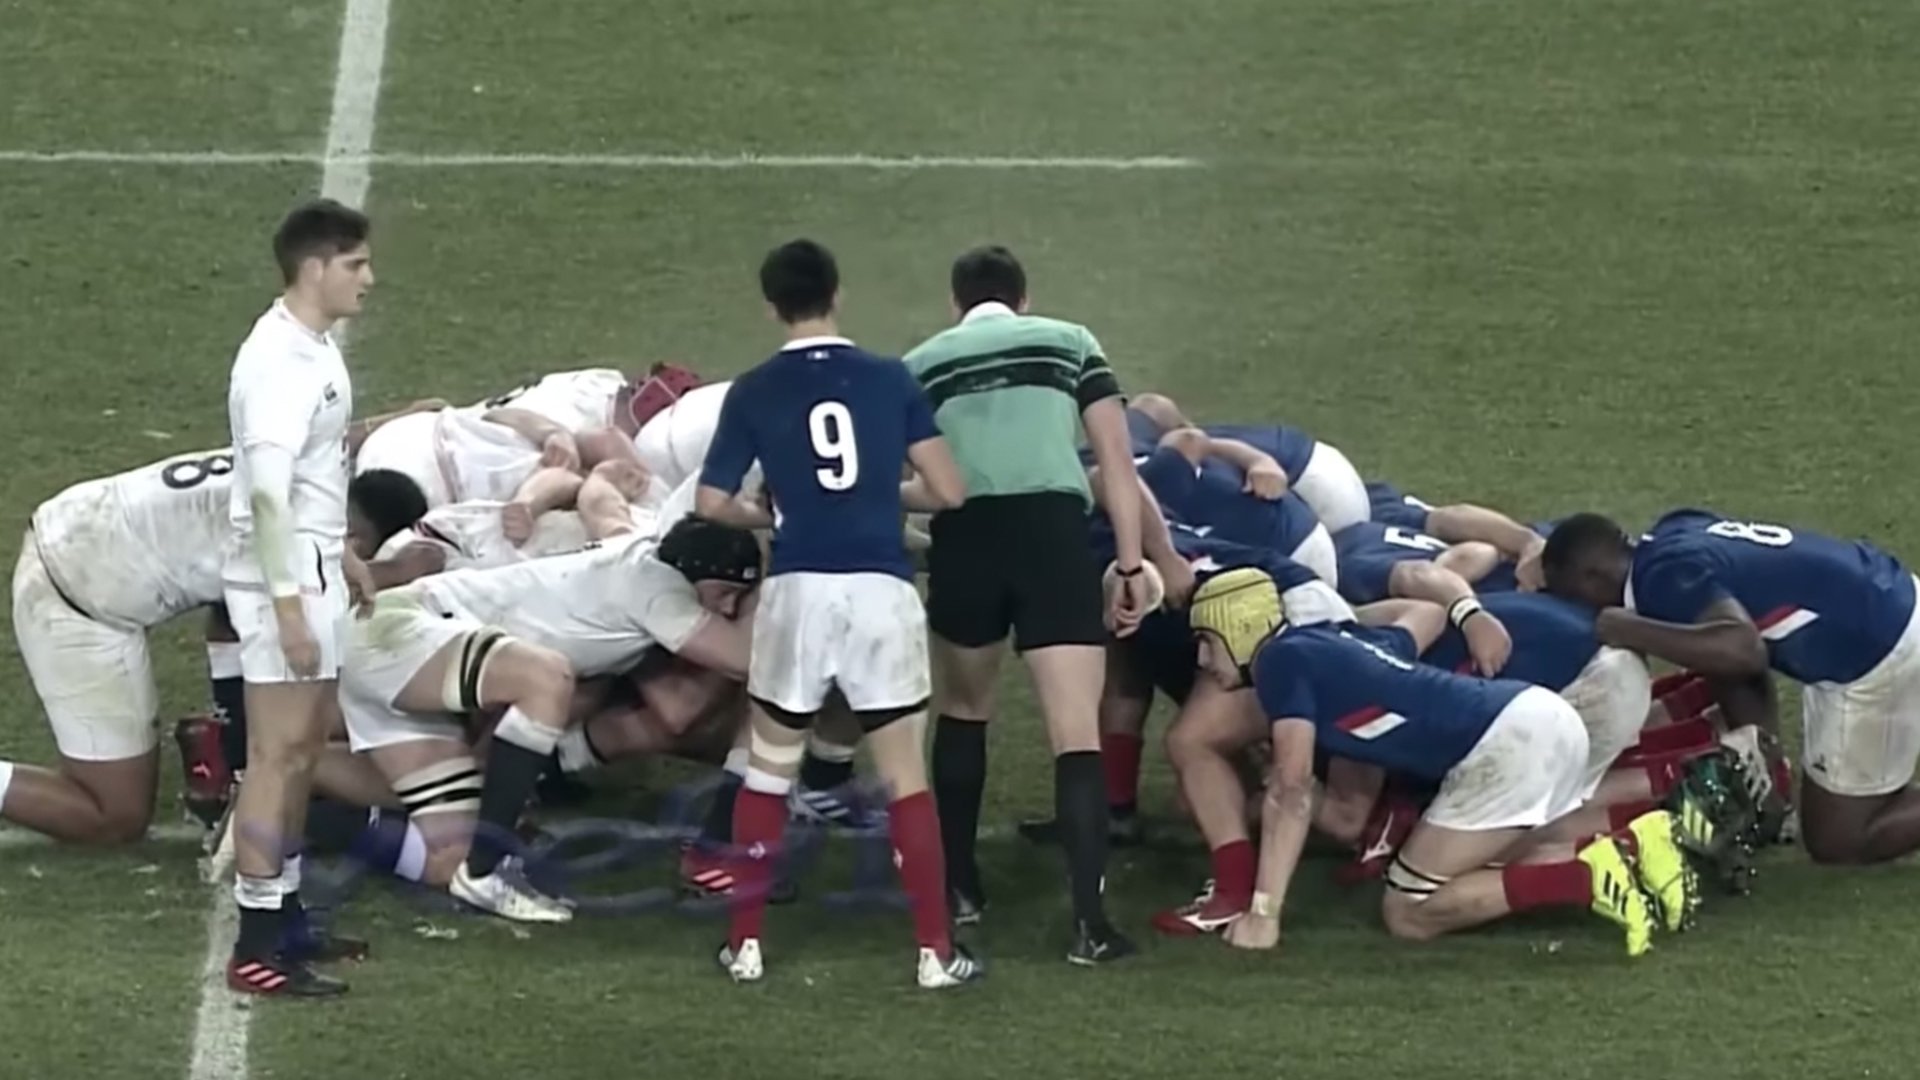 French scrum completely obliterates English youngsters in dominant display